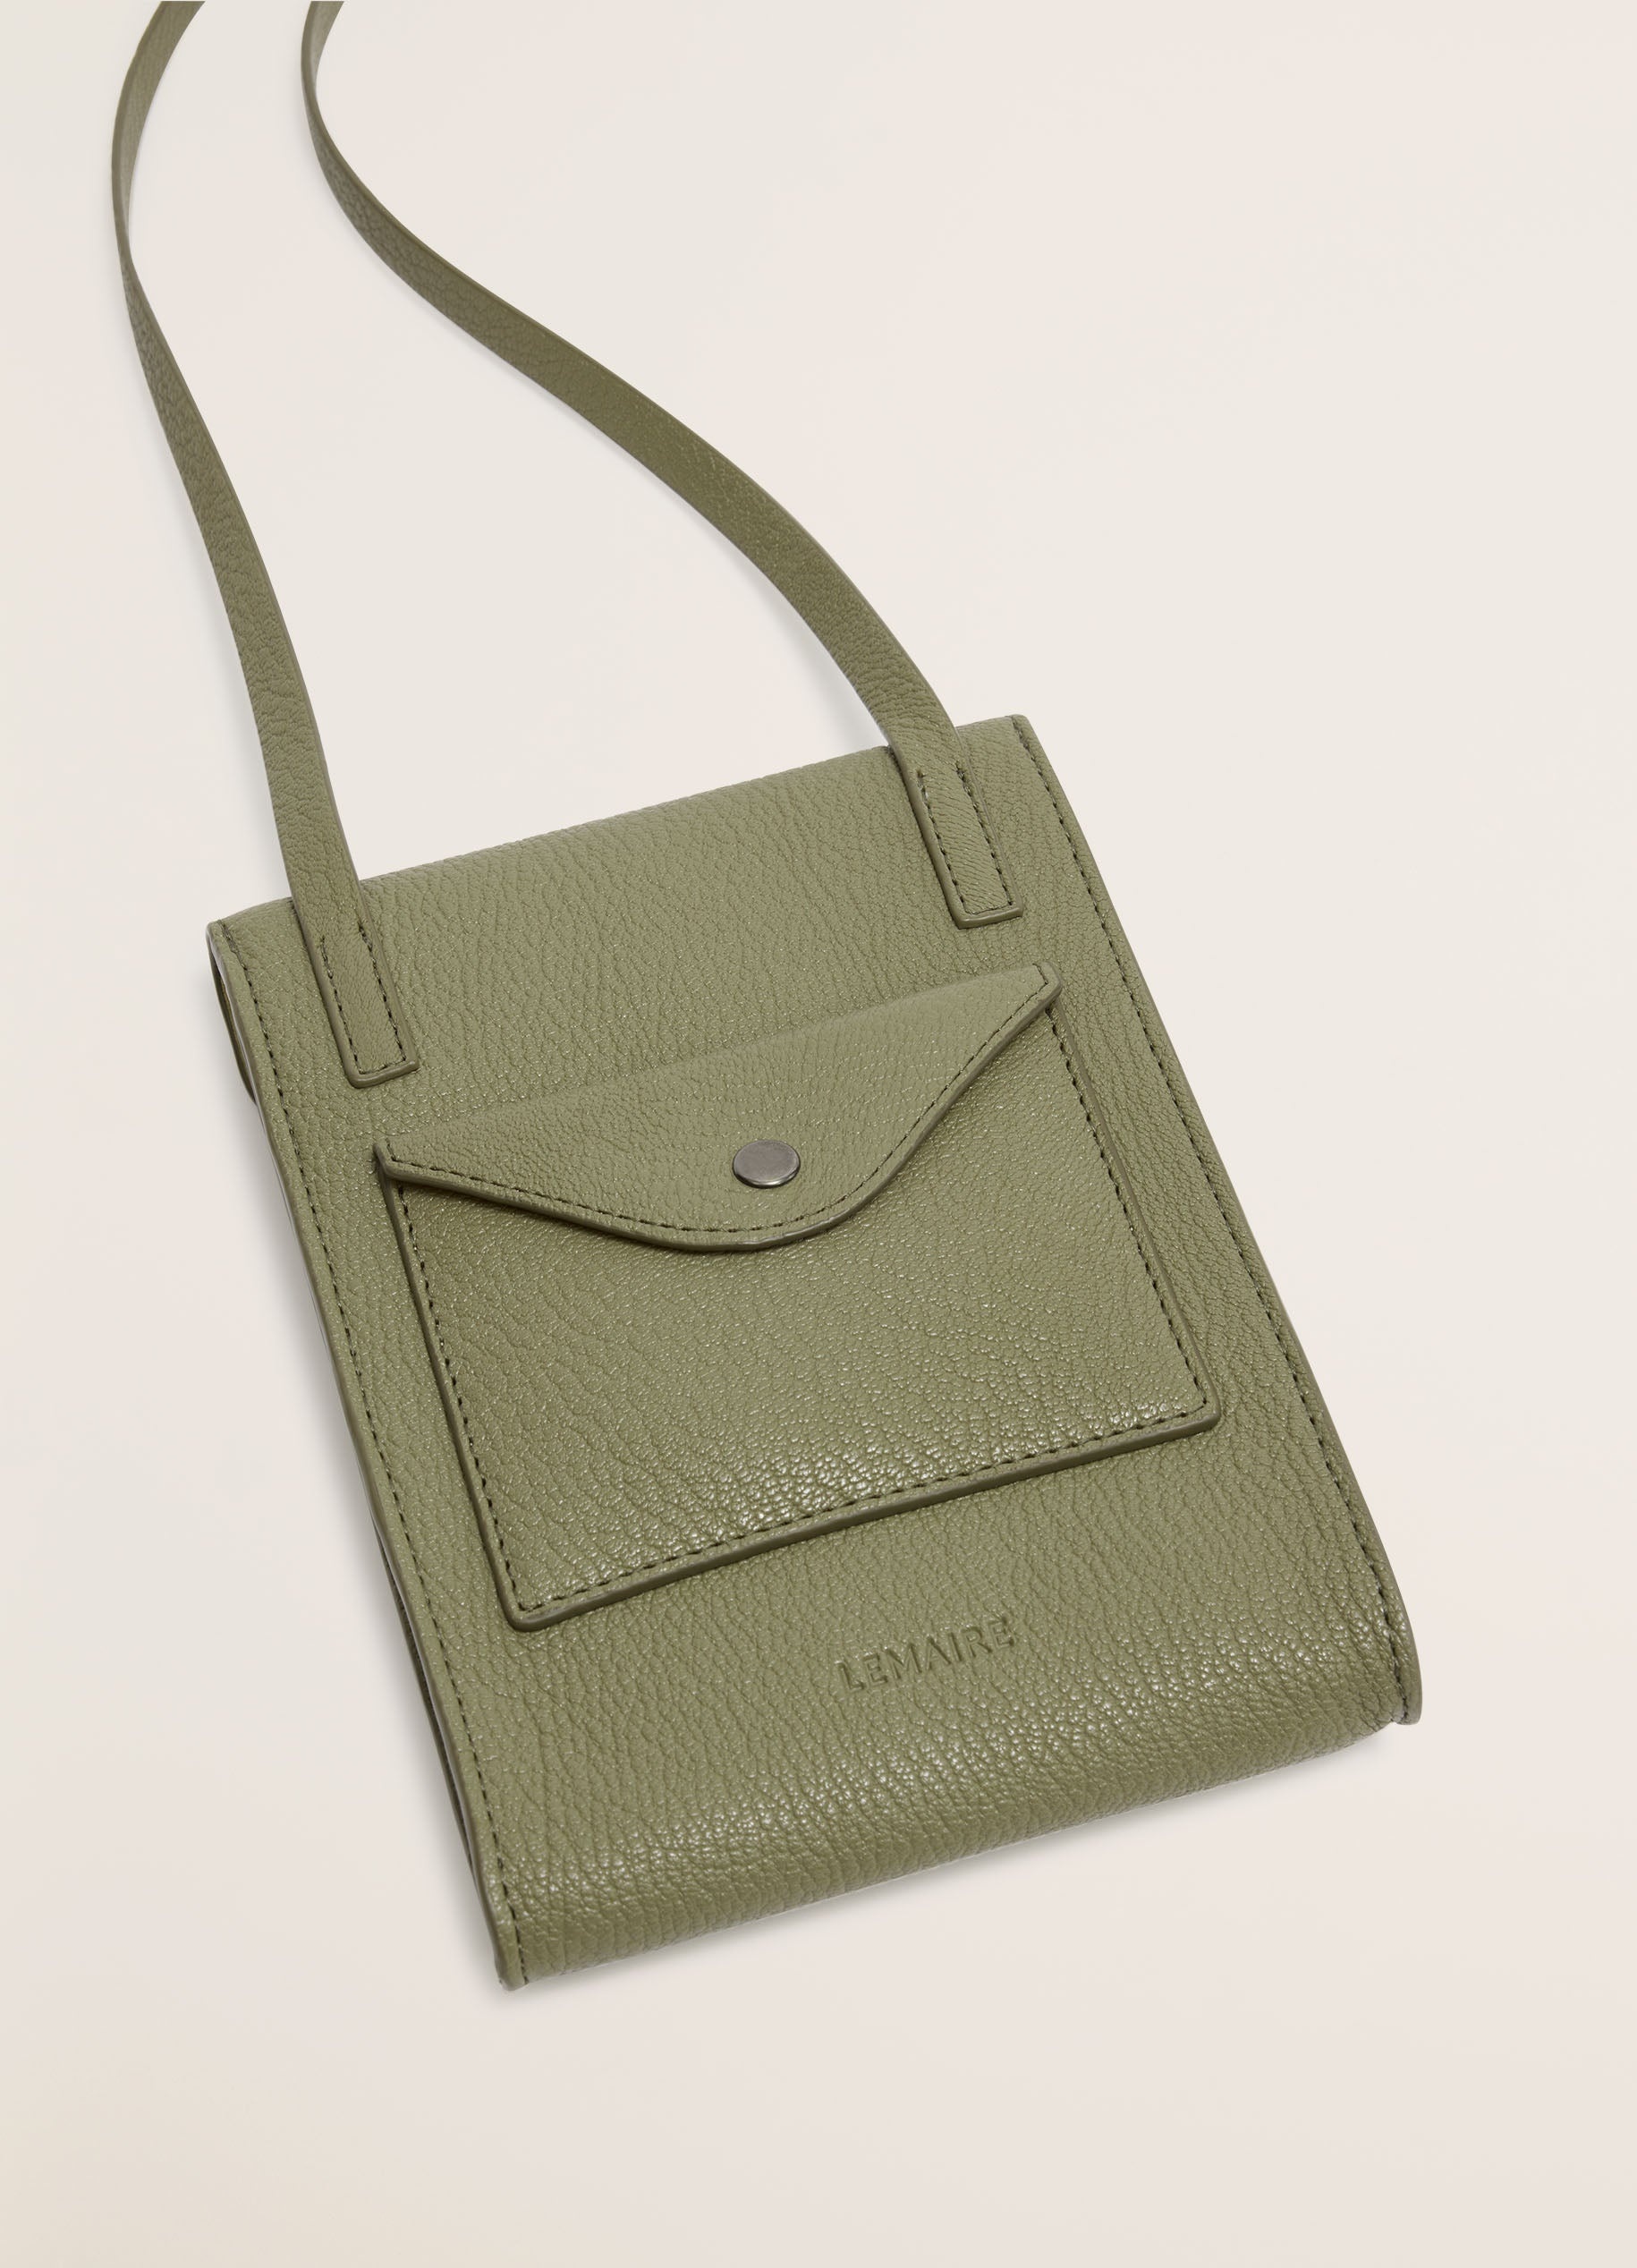 ENVELOPPE WITH STRAP - 2